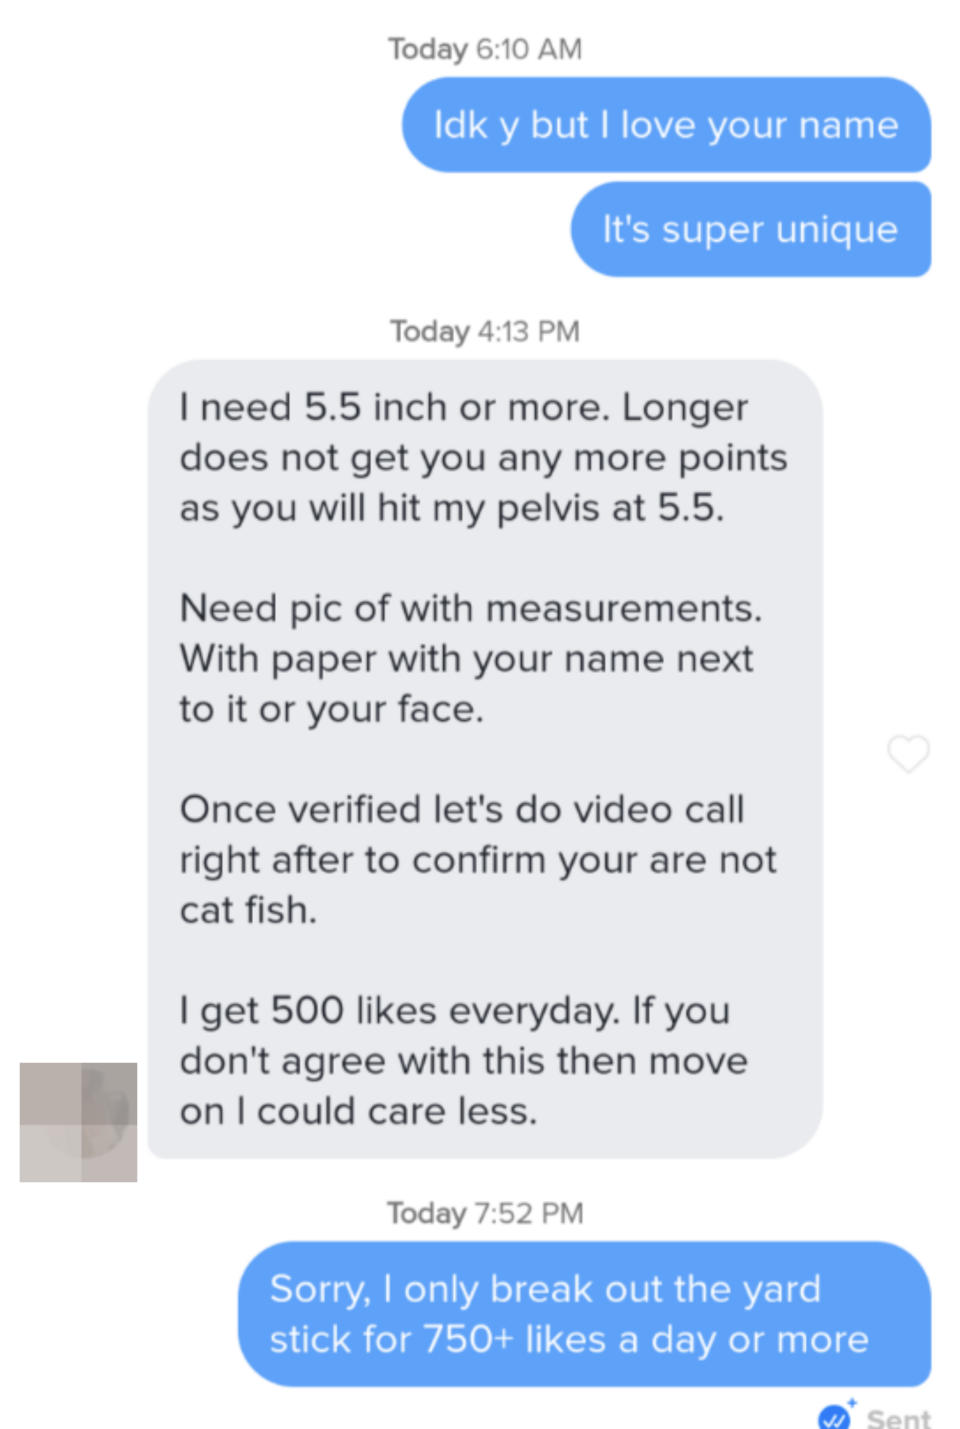 person saying they need person's measurements sent, a photo with their name and a video chat so they're not being cat fished